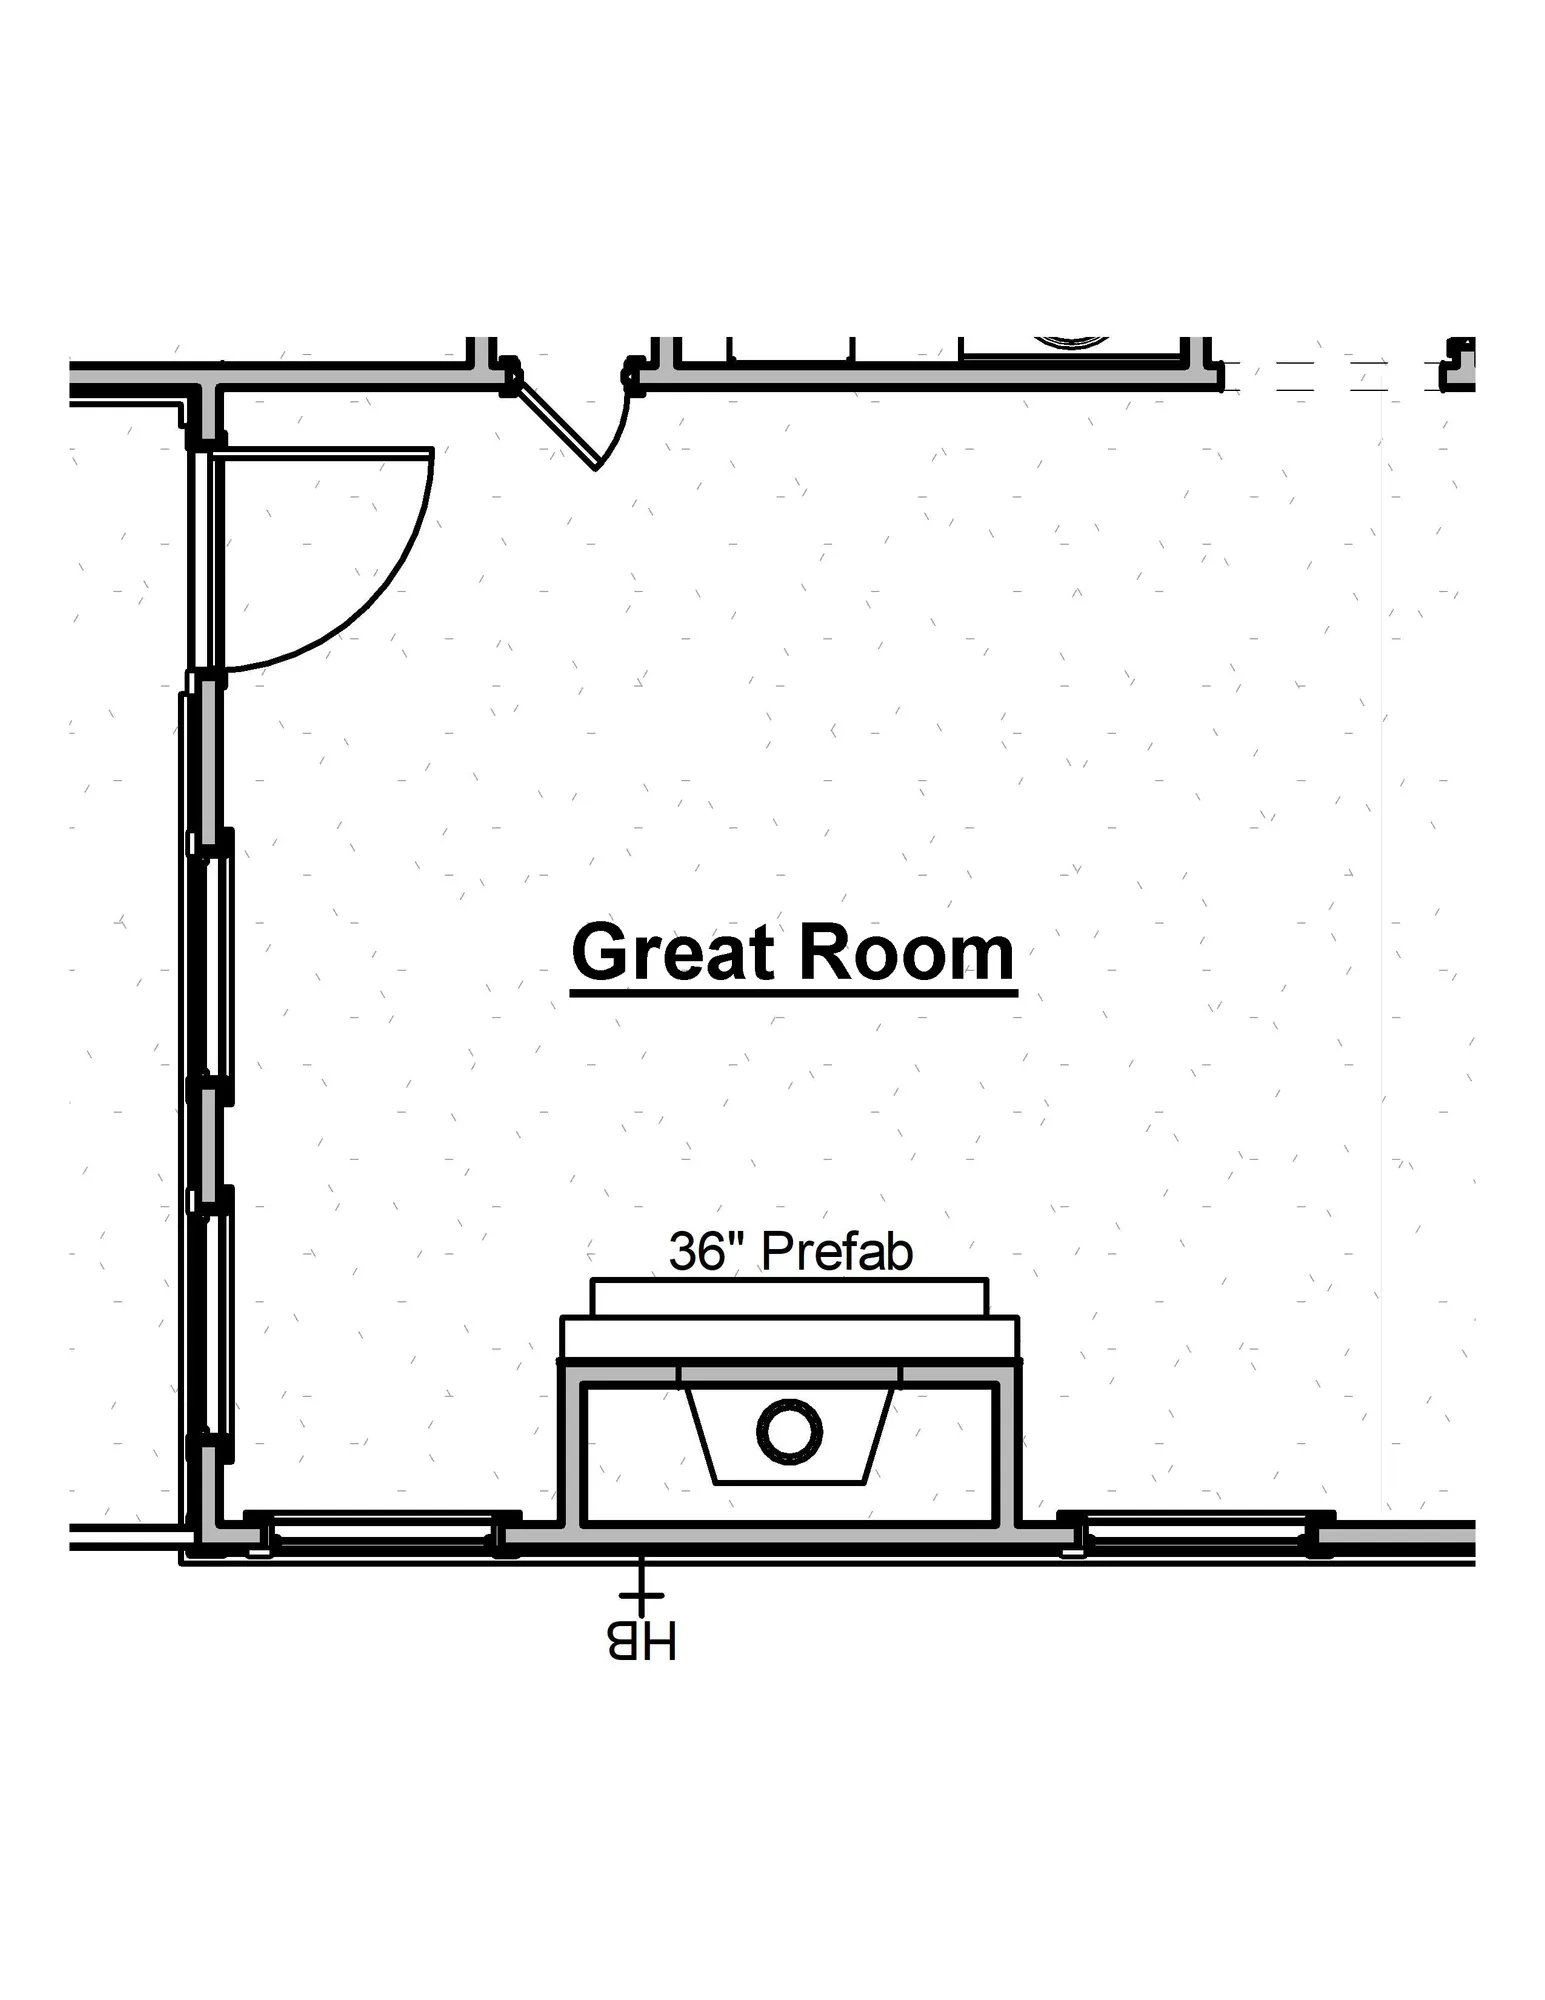 Fireplace Bump-In Option - undefined